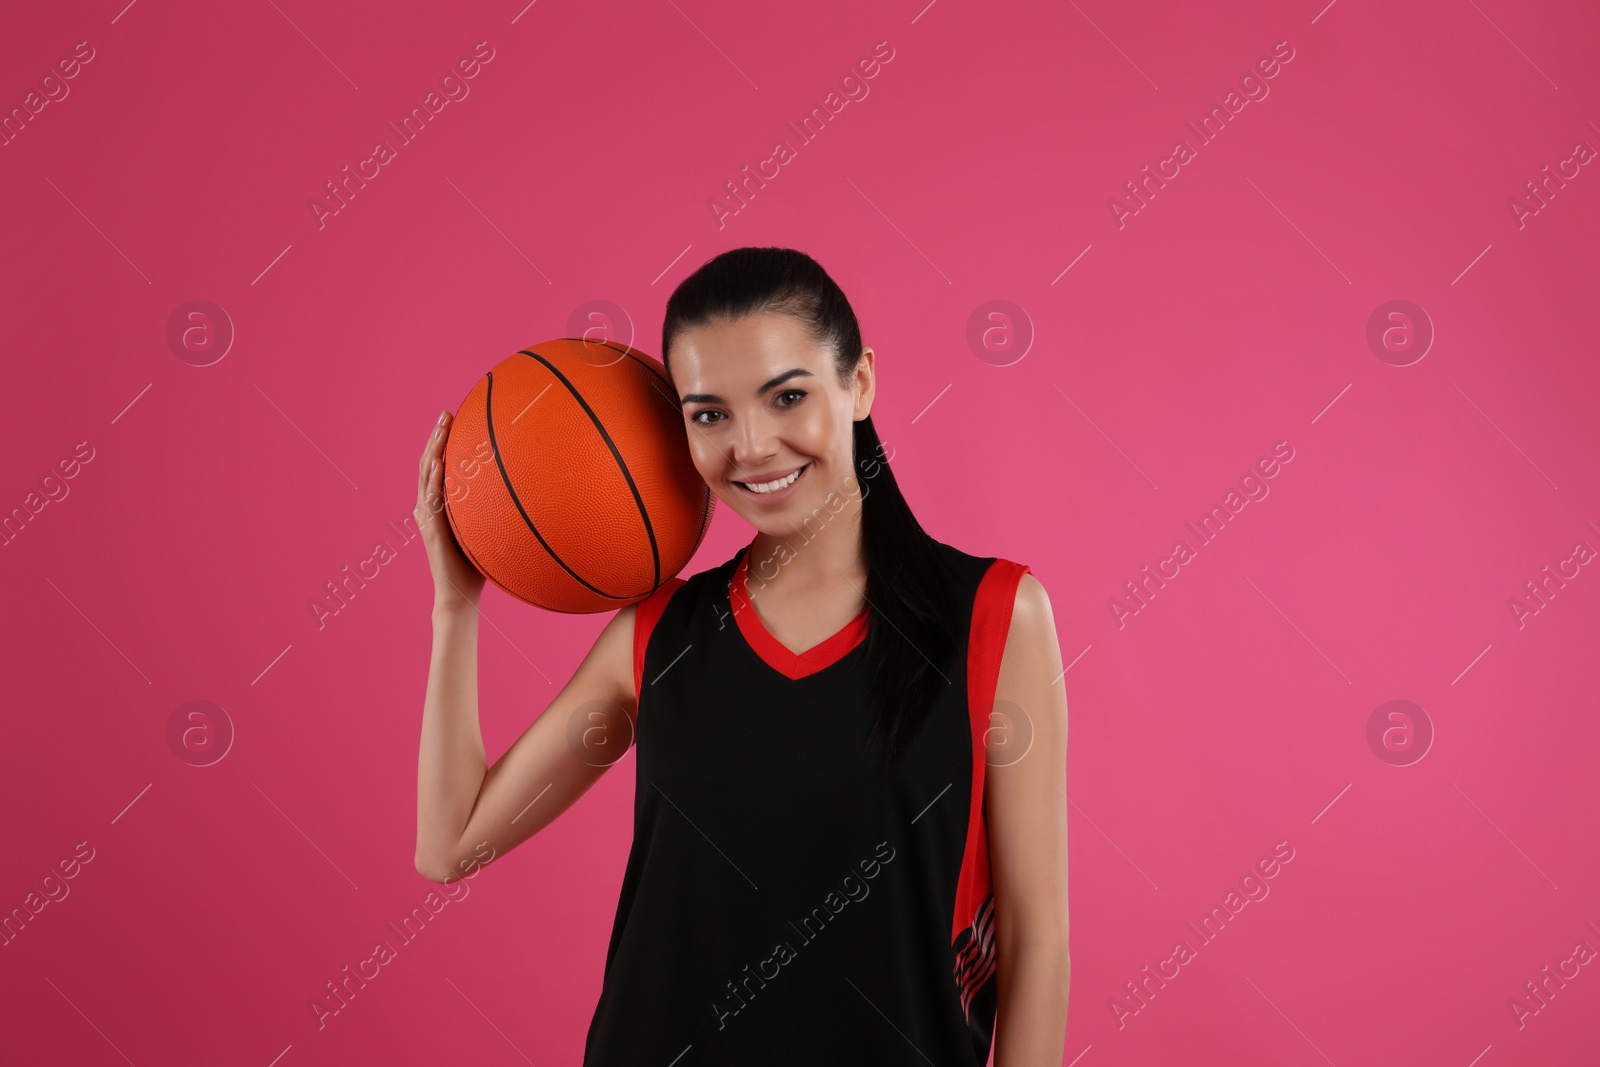 Photo of Basketball player with ball on pink background